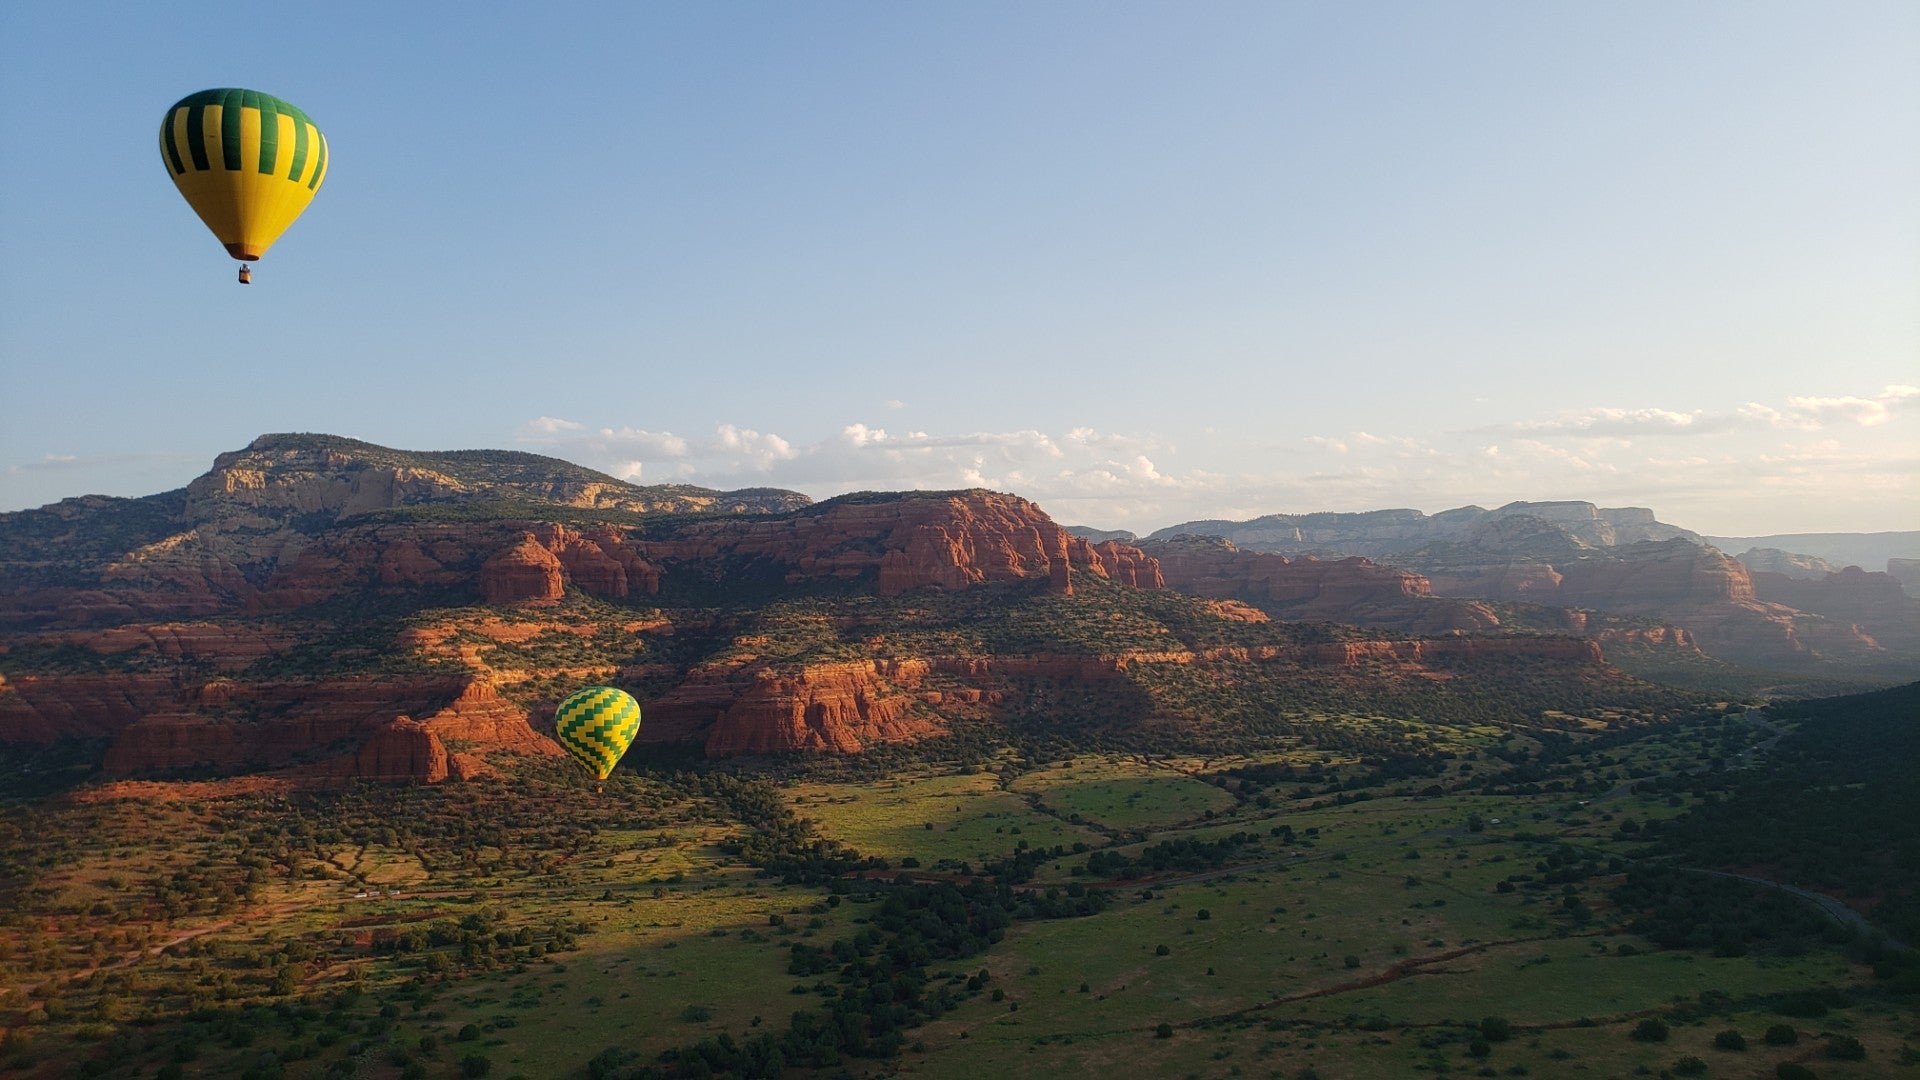 View of Sedona from a hot air balloon